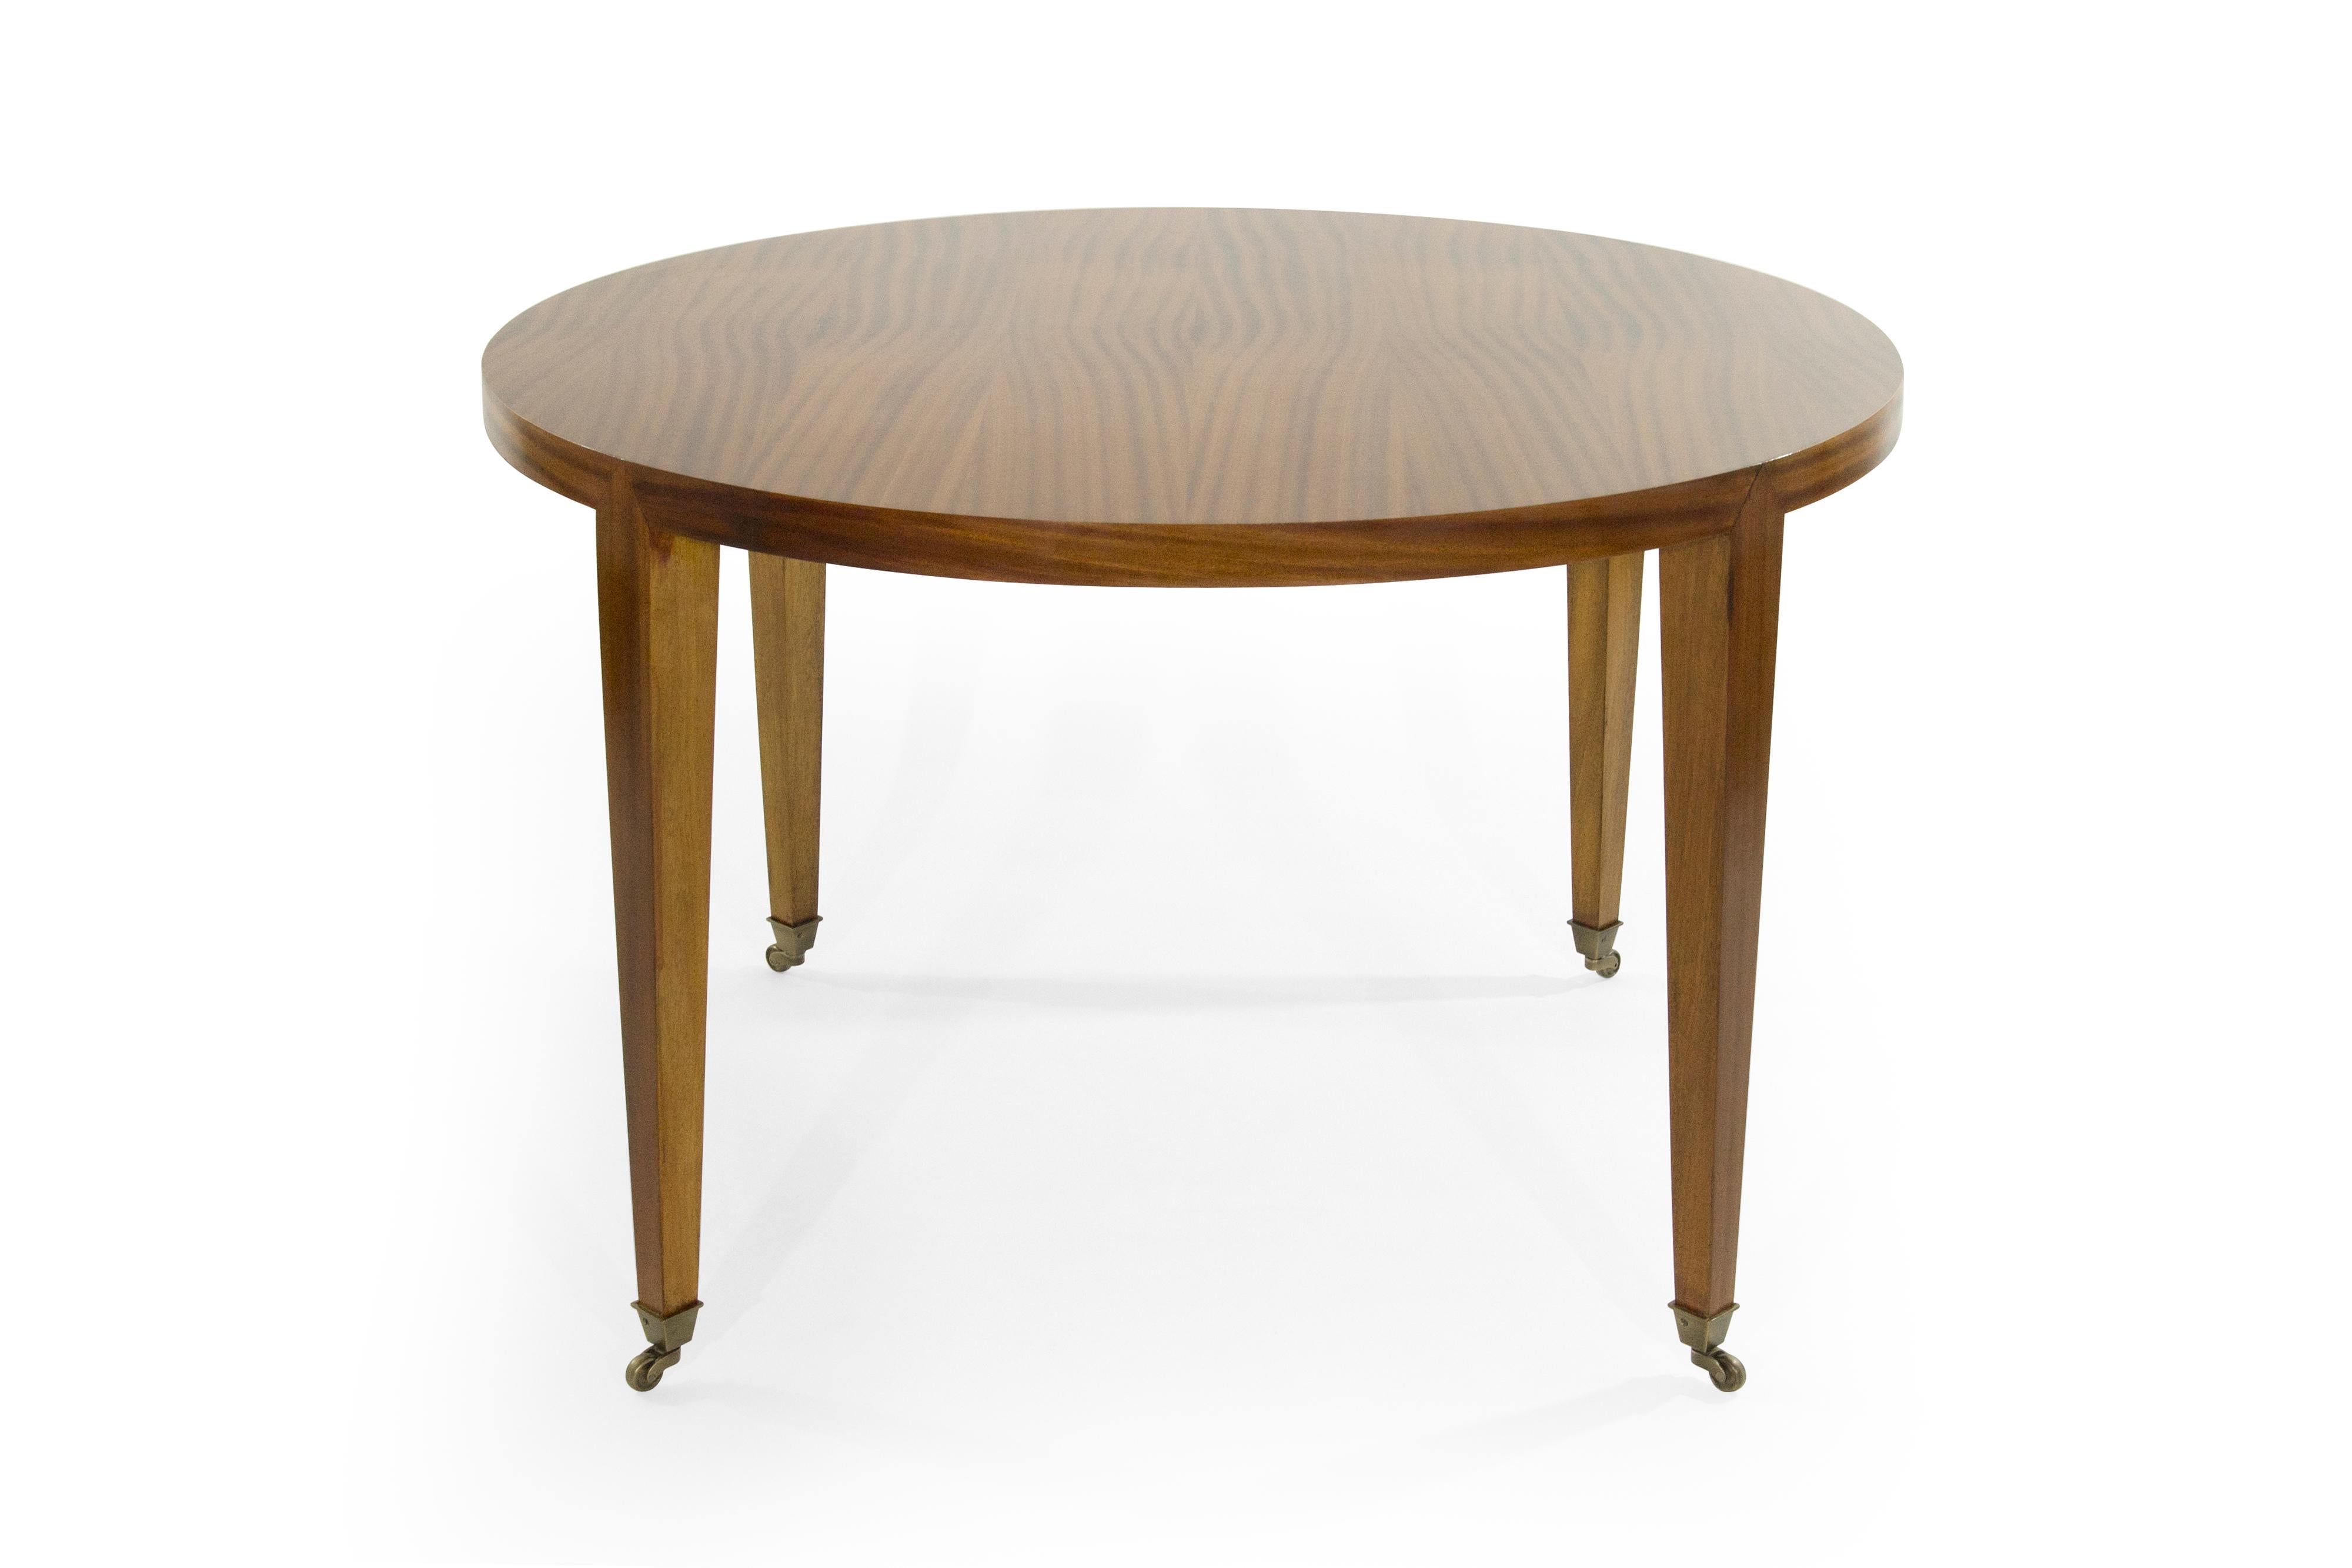 Custom games or breakfast table in the style of Danish designer Severin Hansen. 

High gloss finish over natural mahogany, fitted in casters in am antiqued brass finish.